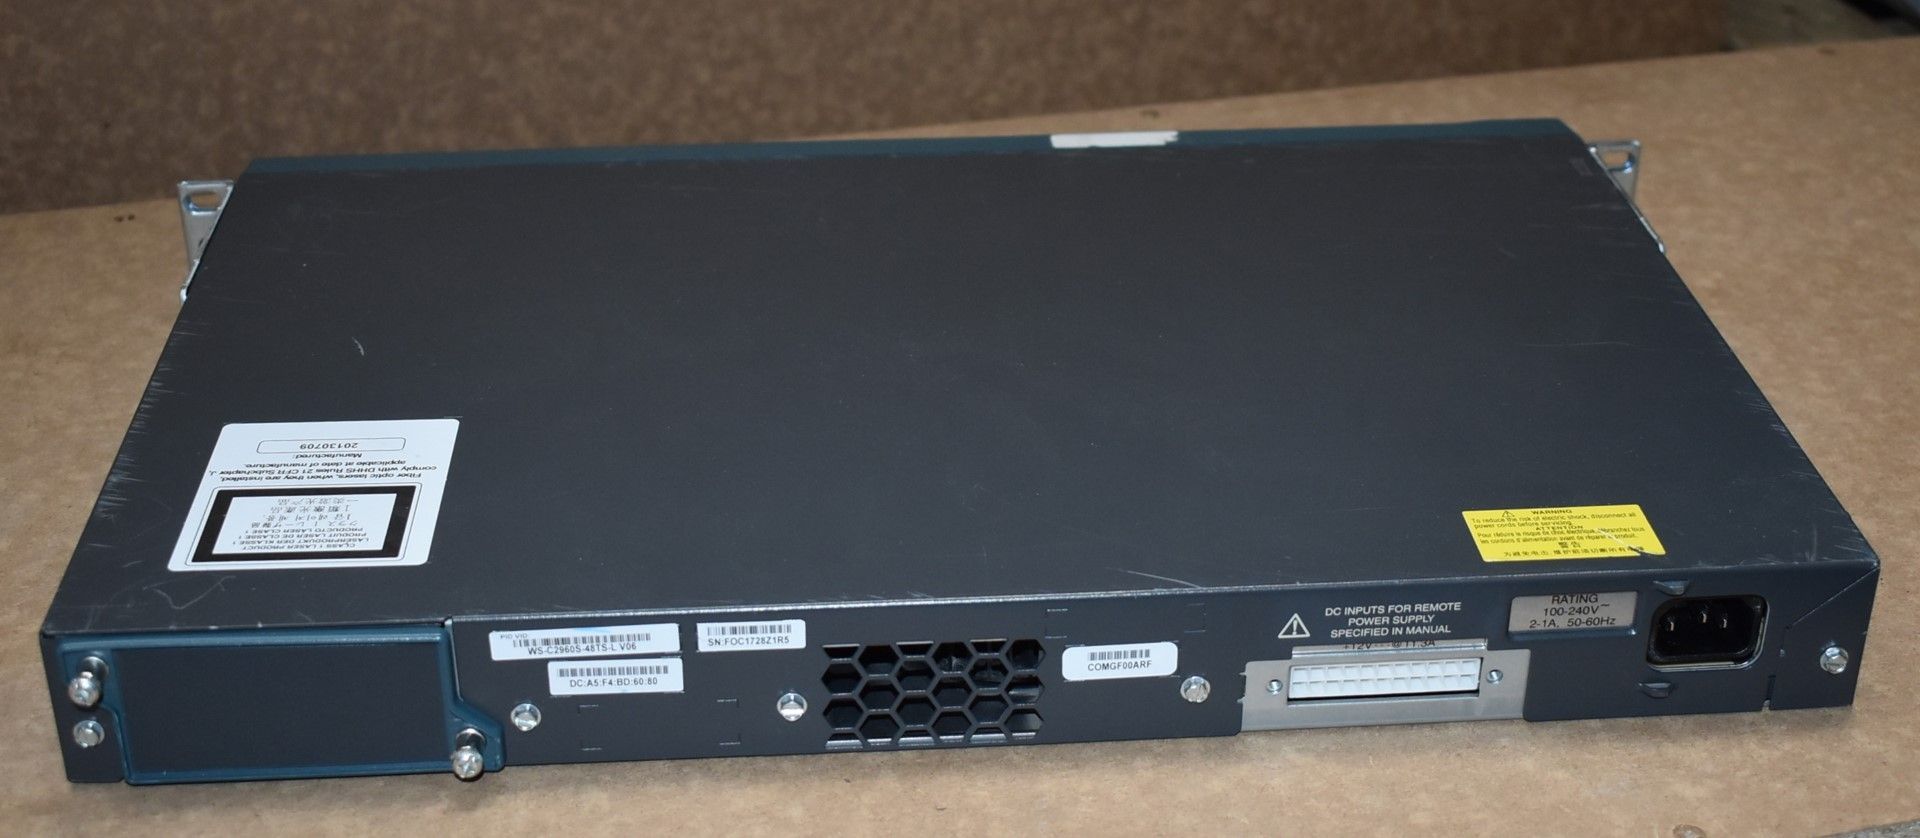 1 x Cisco Catalyst 2960S 48 Port Switch - Includes Power Cable - Ref: MPC114 CA - CL678 - - Image 5 of 6